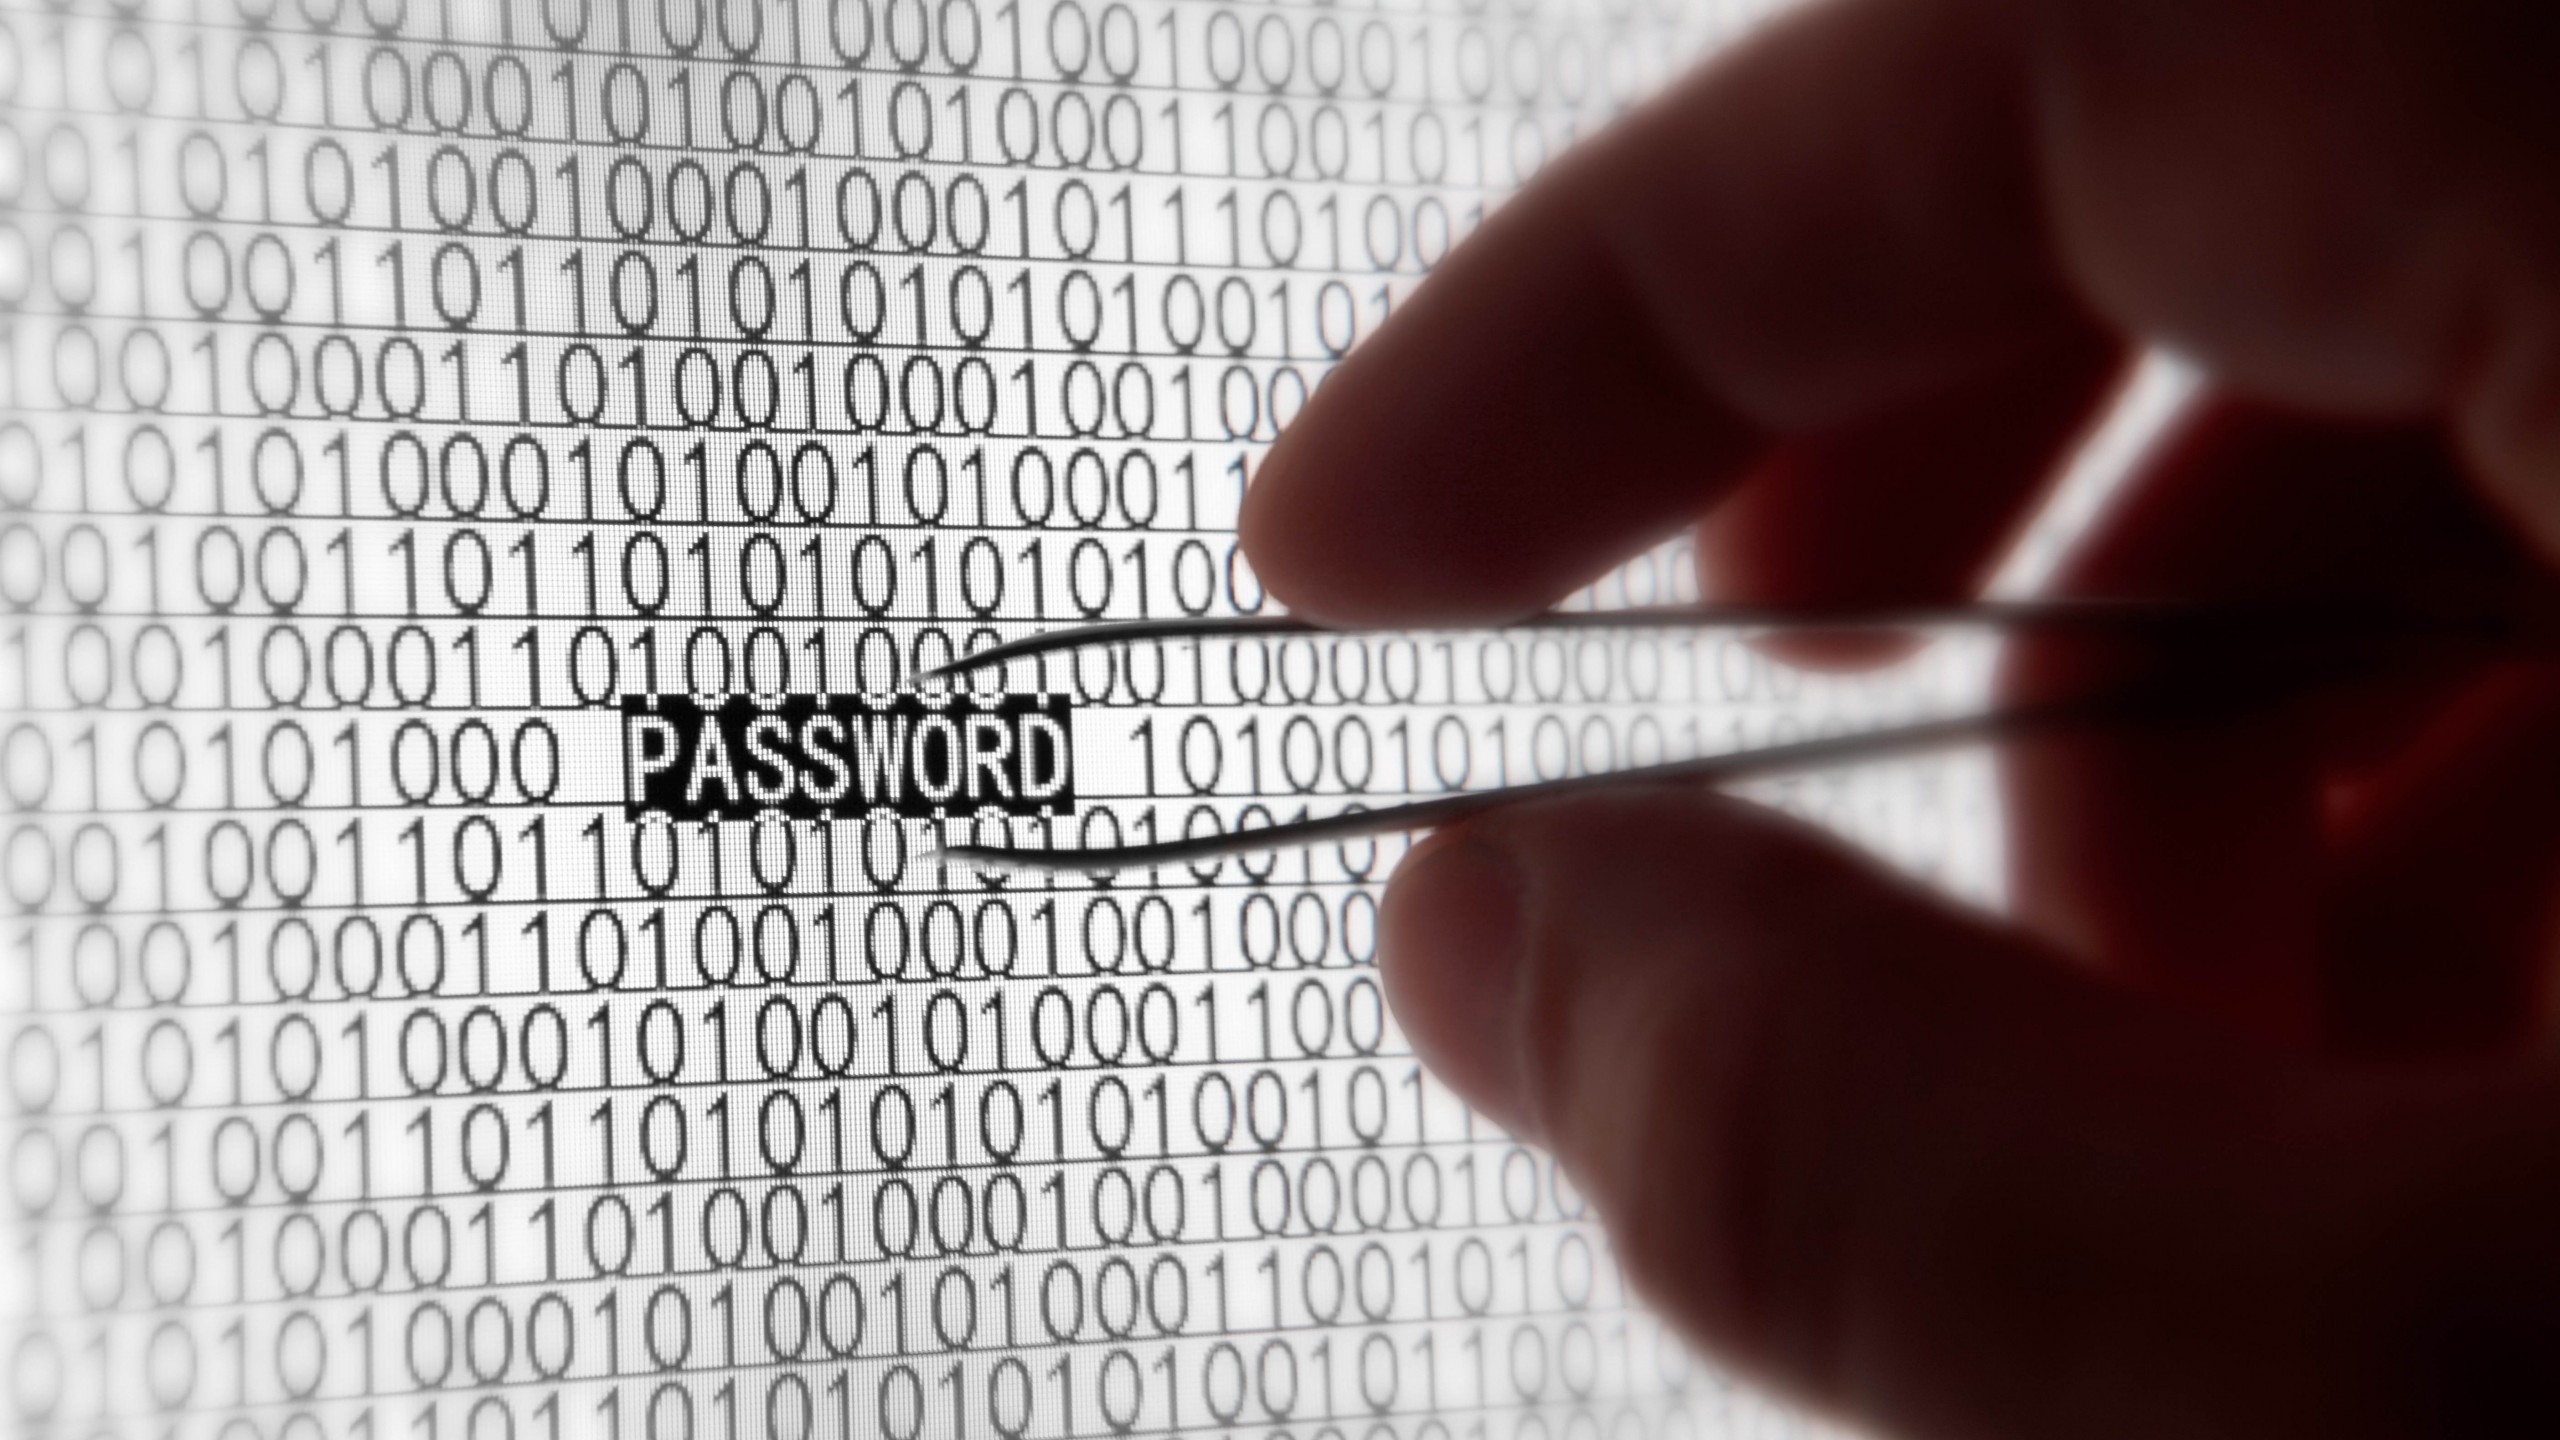 How You Can Strengthen Your Network and Security with Passwords